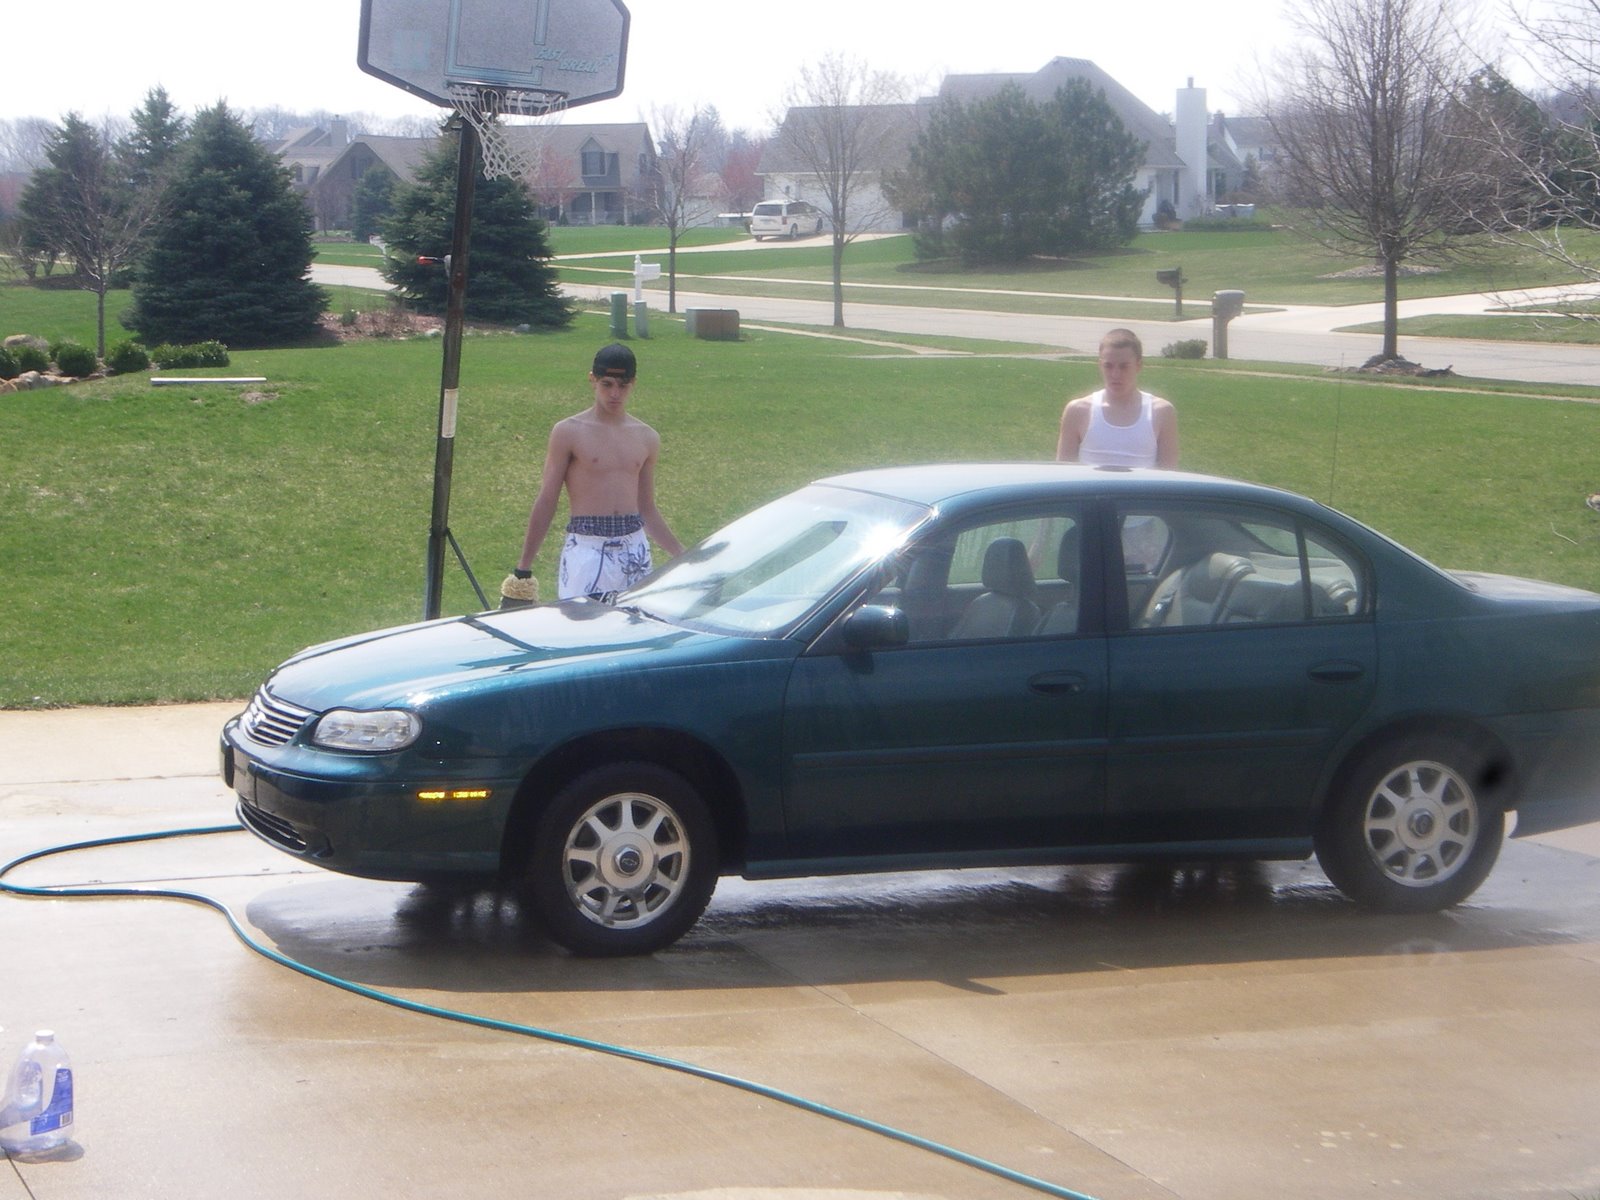 [Zach+lost+a+bet+to+his+dad+and+had+to+wash+the+car08+003.jpg]